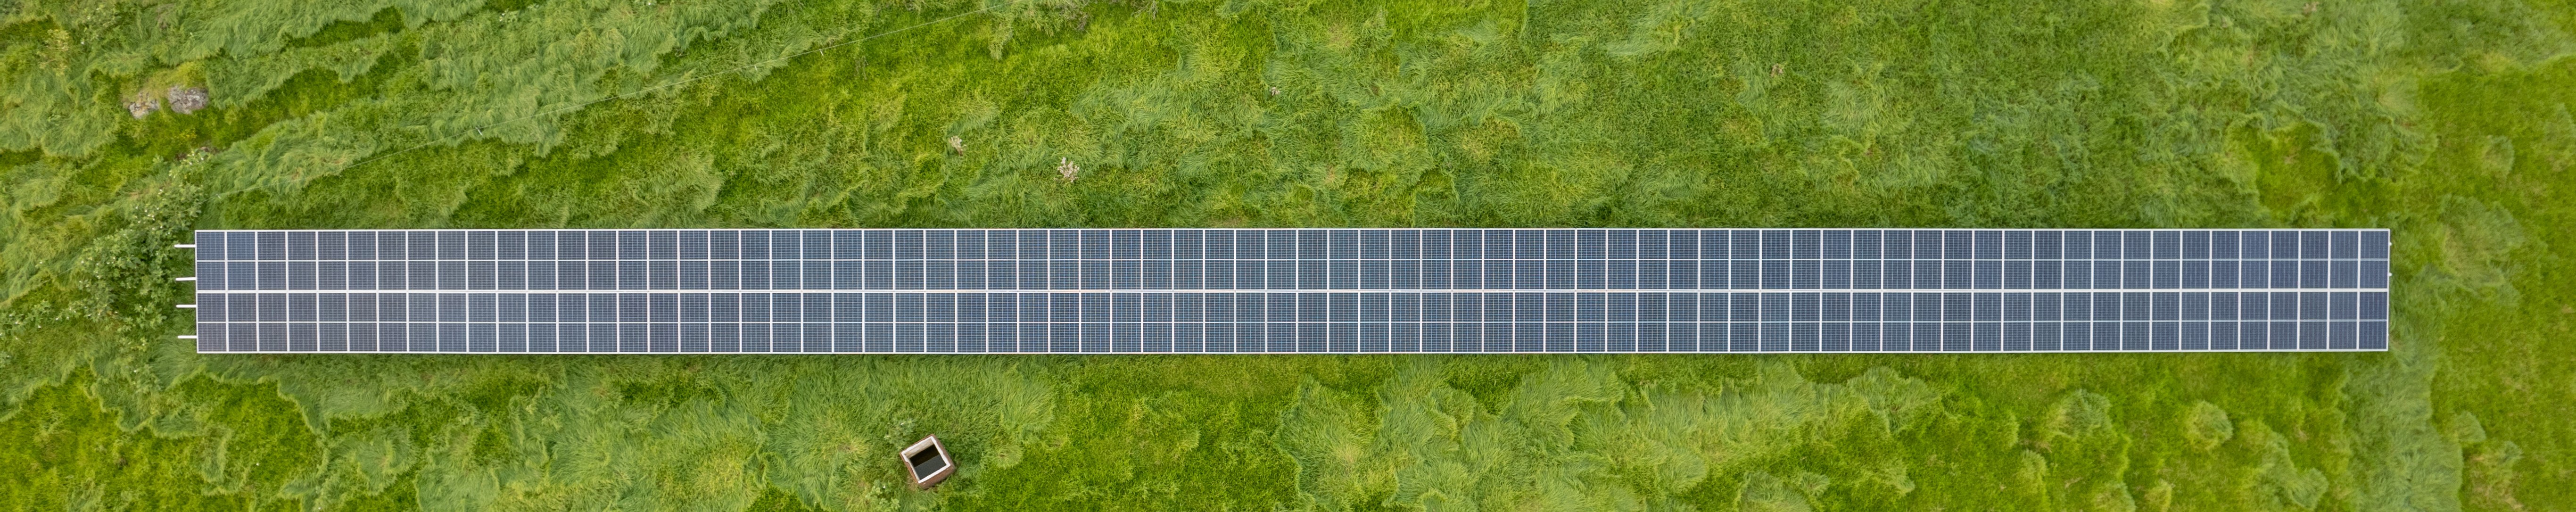 drone photo looking down on solar panels on bright green pasture